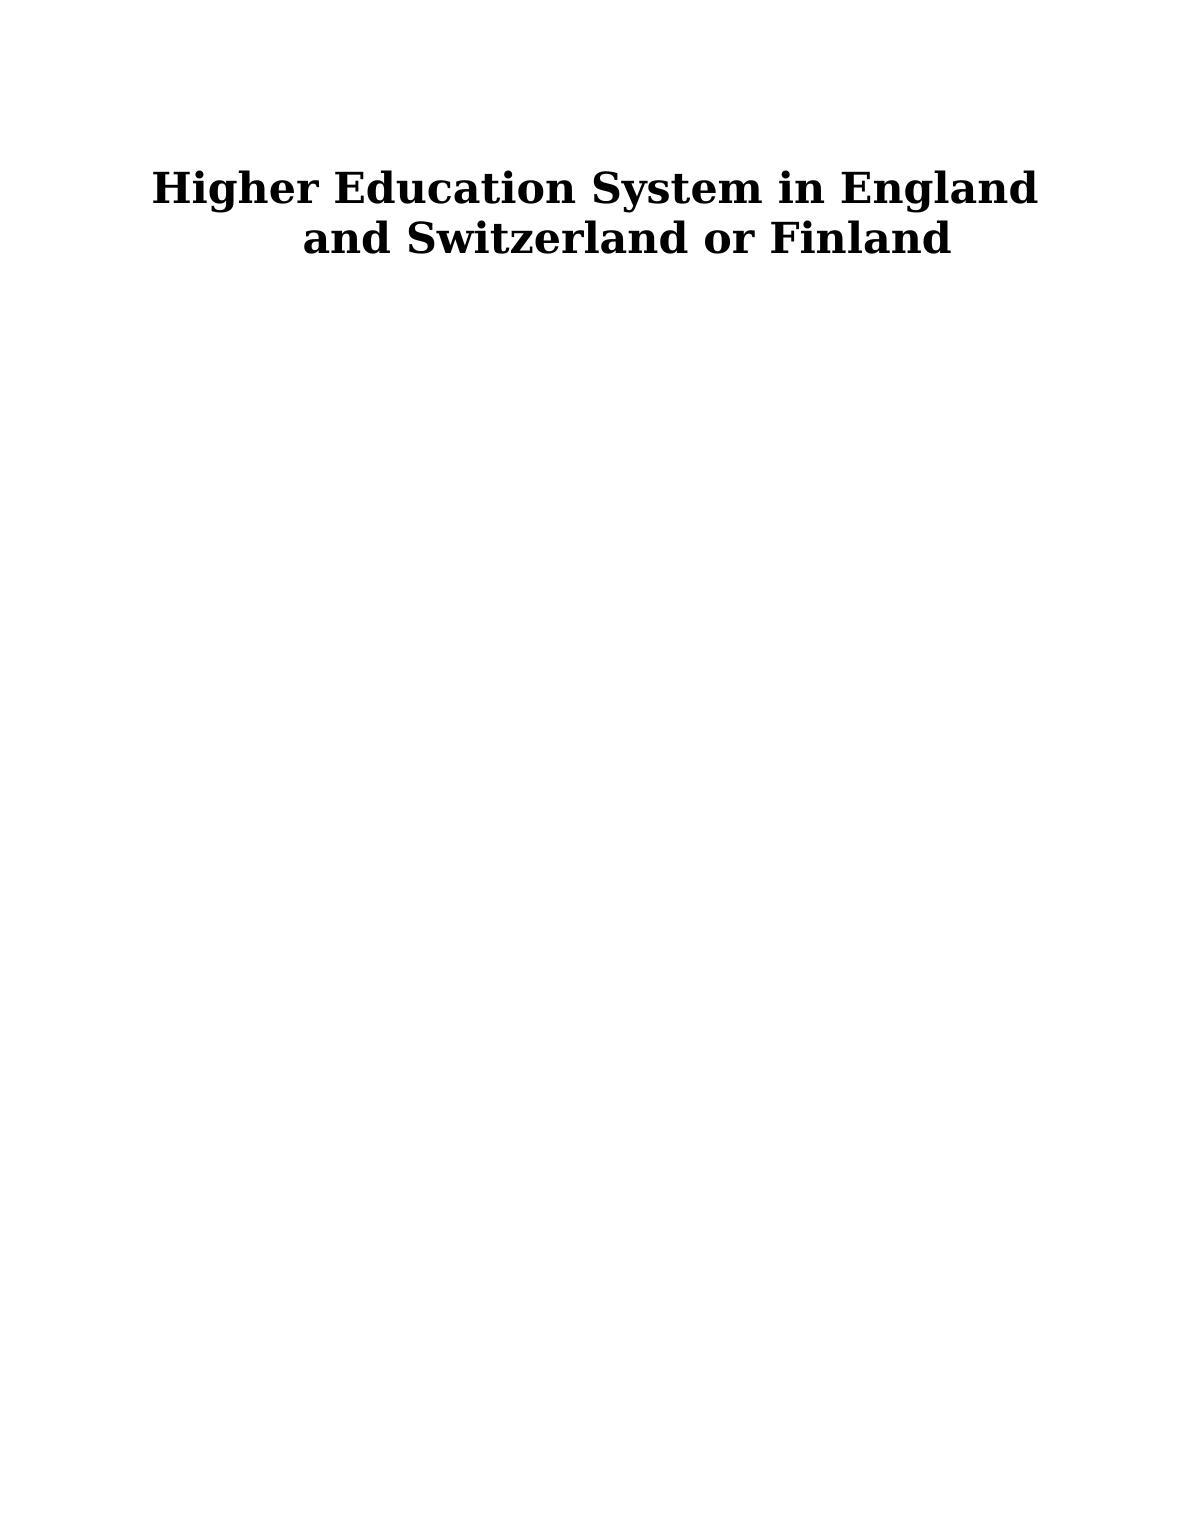 Higher Education System in England, Switzerland and Finland_1